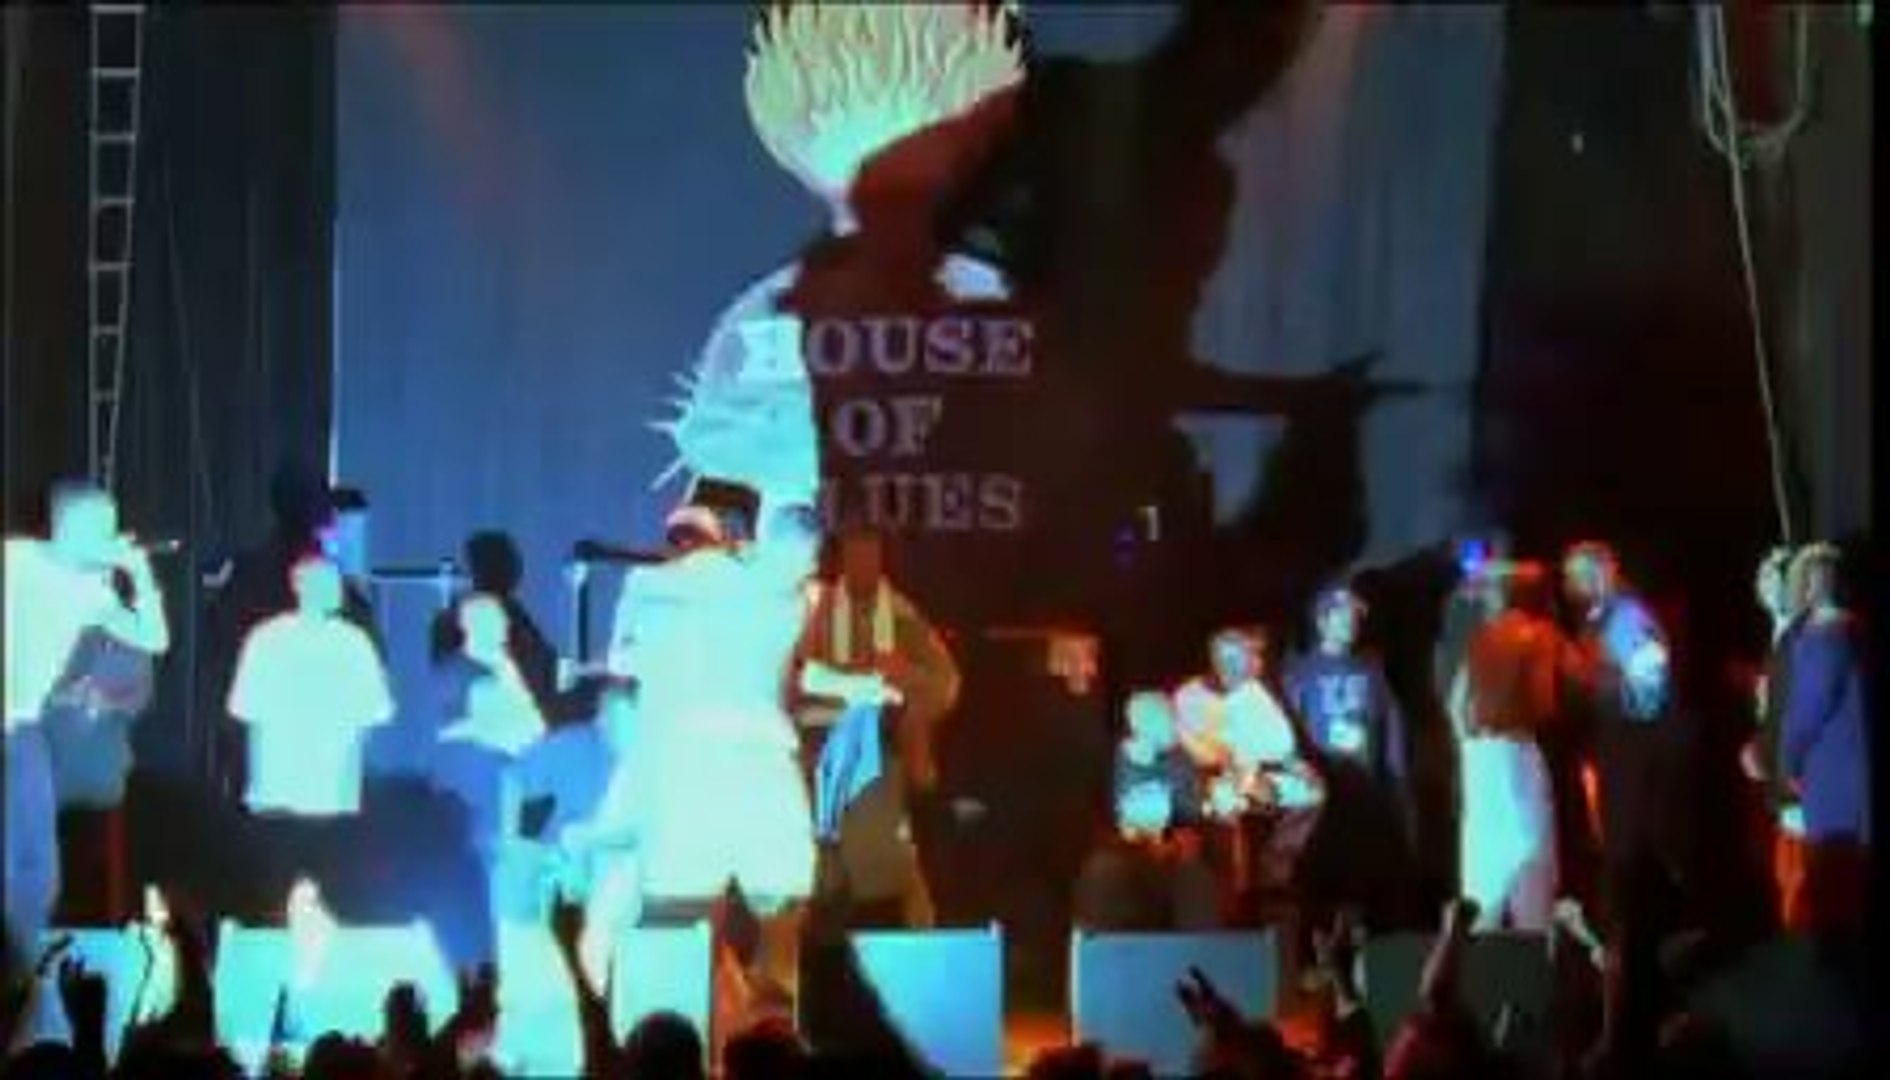 Tupac - How Do You Want It (Live at the House of Blues) - video Dailymotion